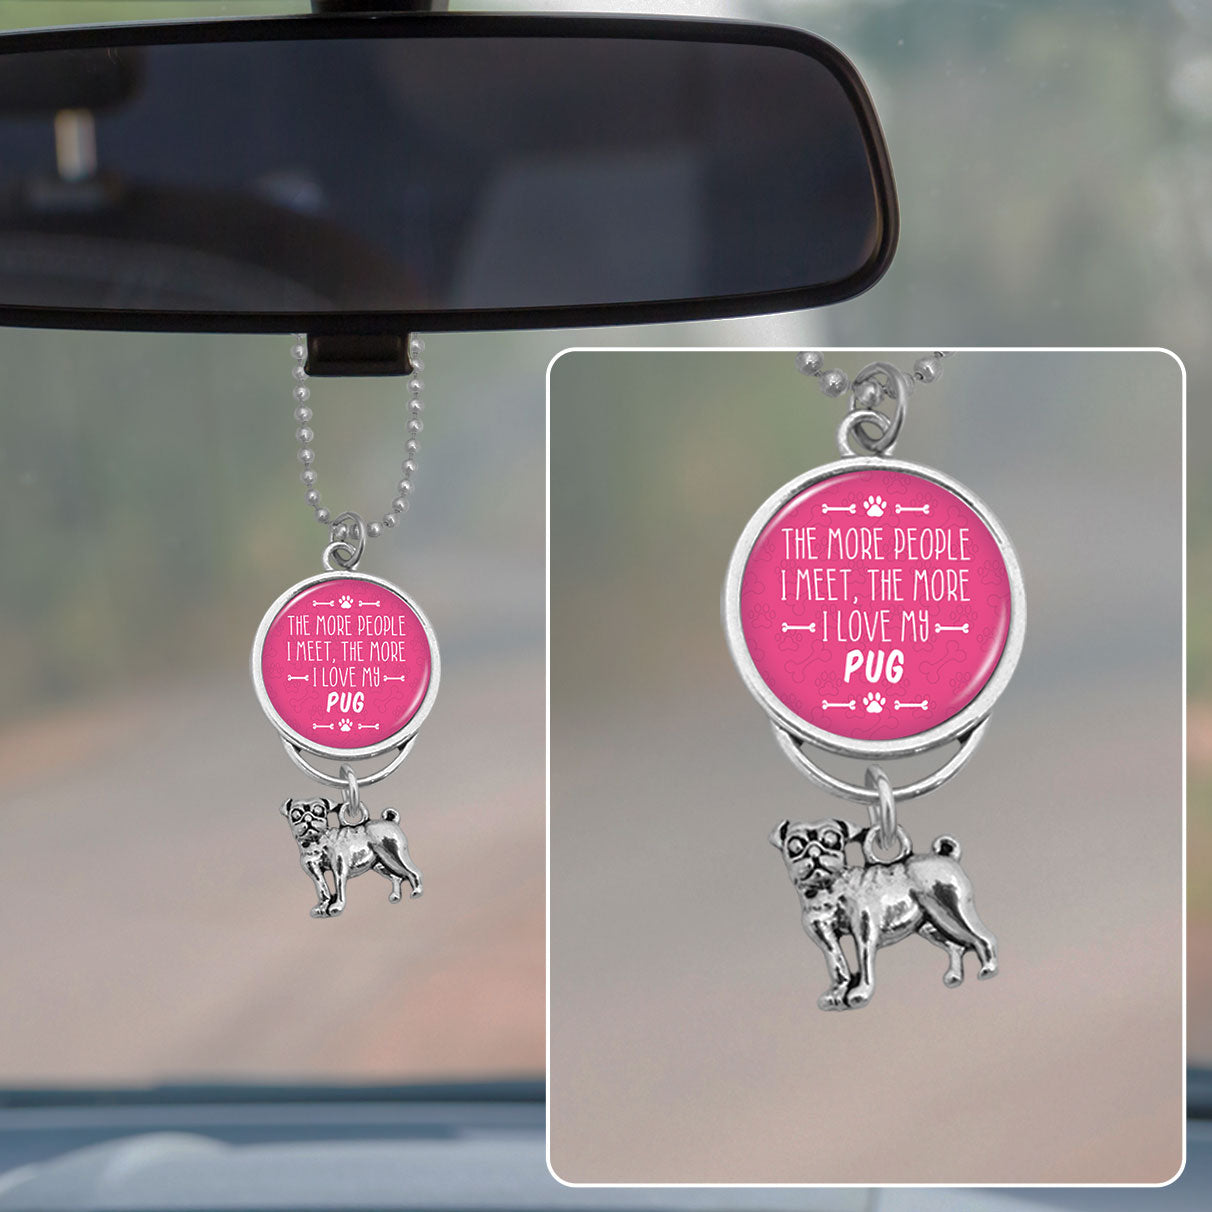 The More People I Meet, The More I Love My Pug Rearview Mirror Charm